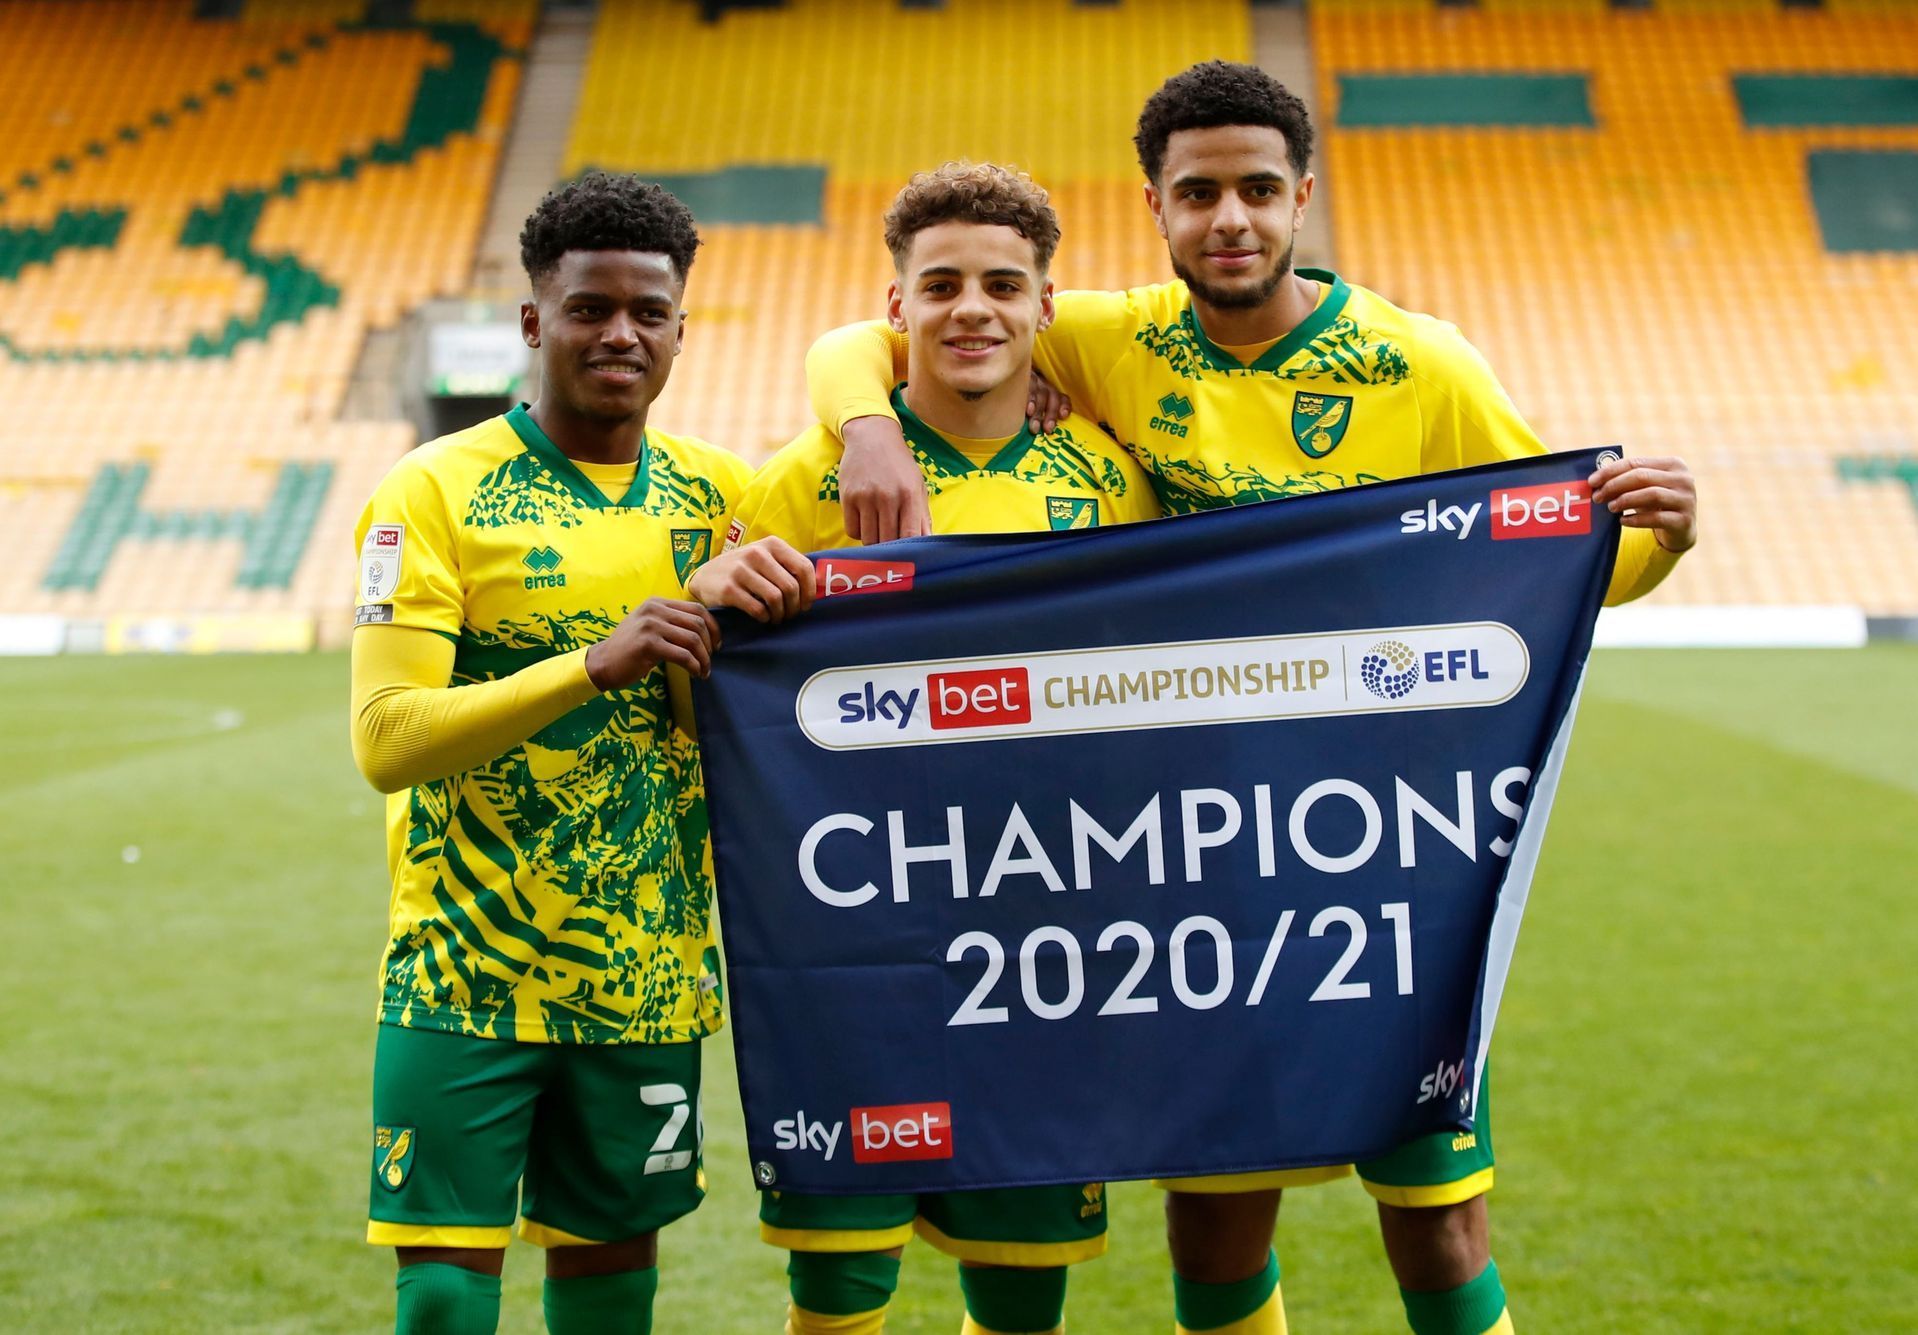 Bali Mumba, Max Aarons a Andrew Omobamidele (Norwich City)